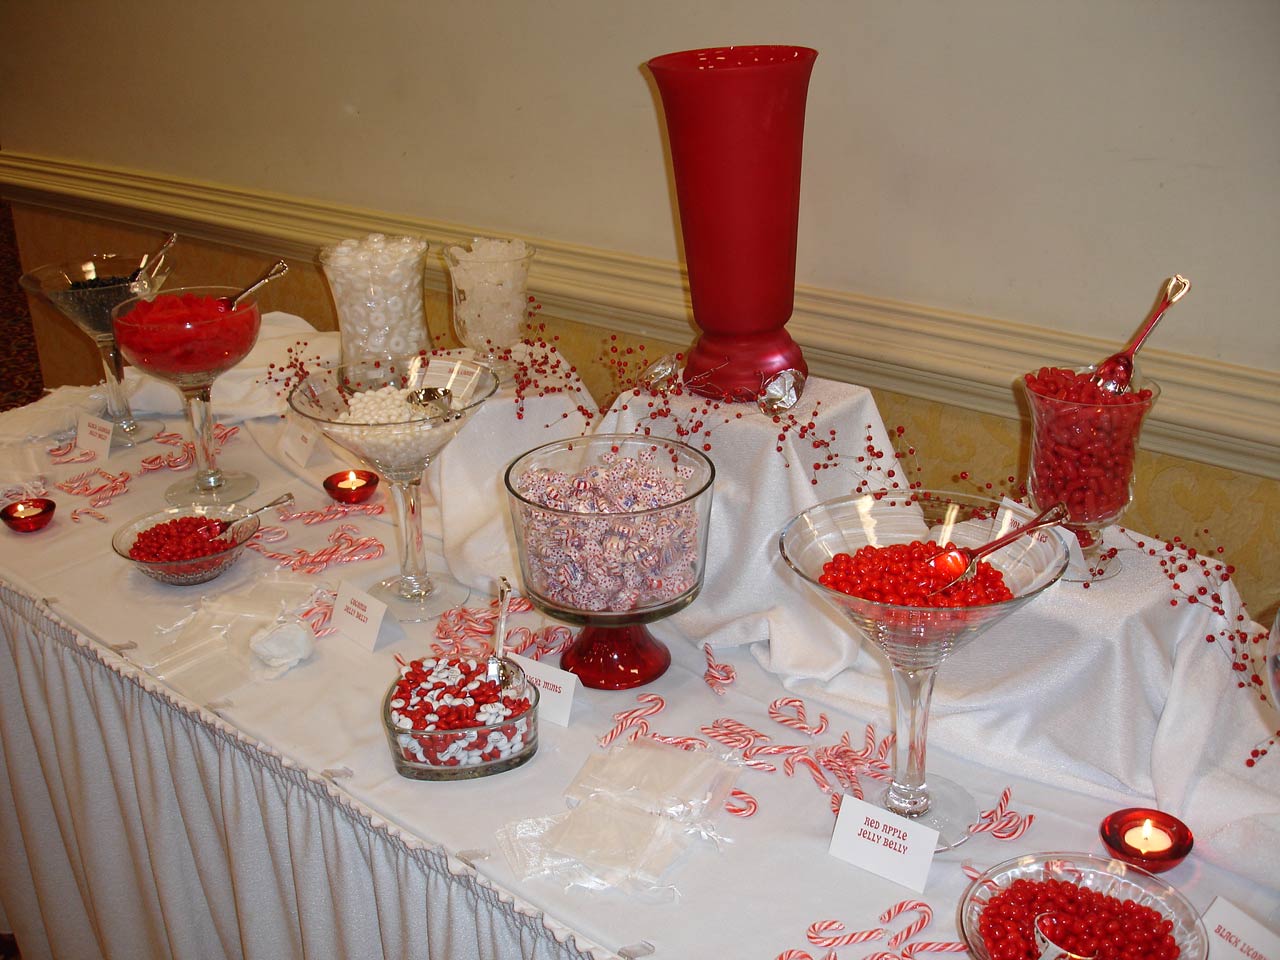 A valentine's day wedding table catered by Kings Korner in Richmond, VA